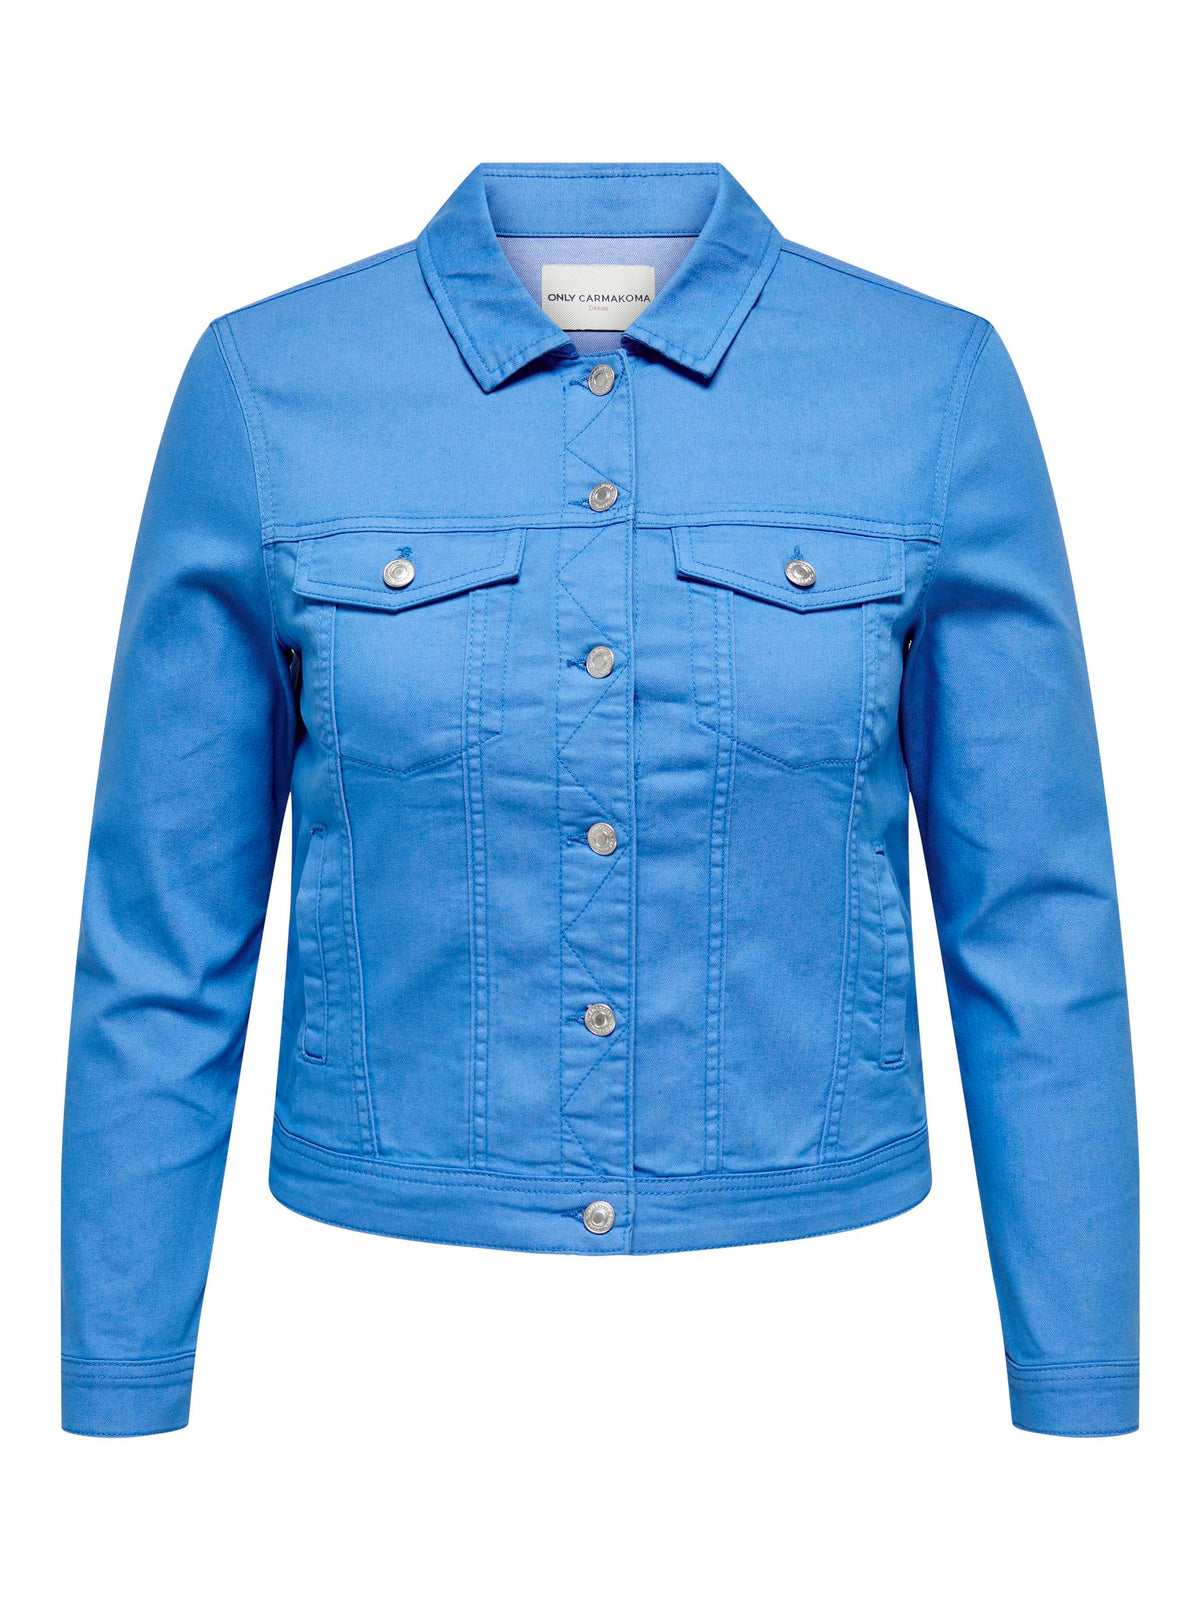 Only Carmakoma Denim Jacket in French Blue